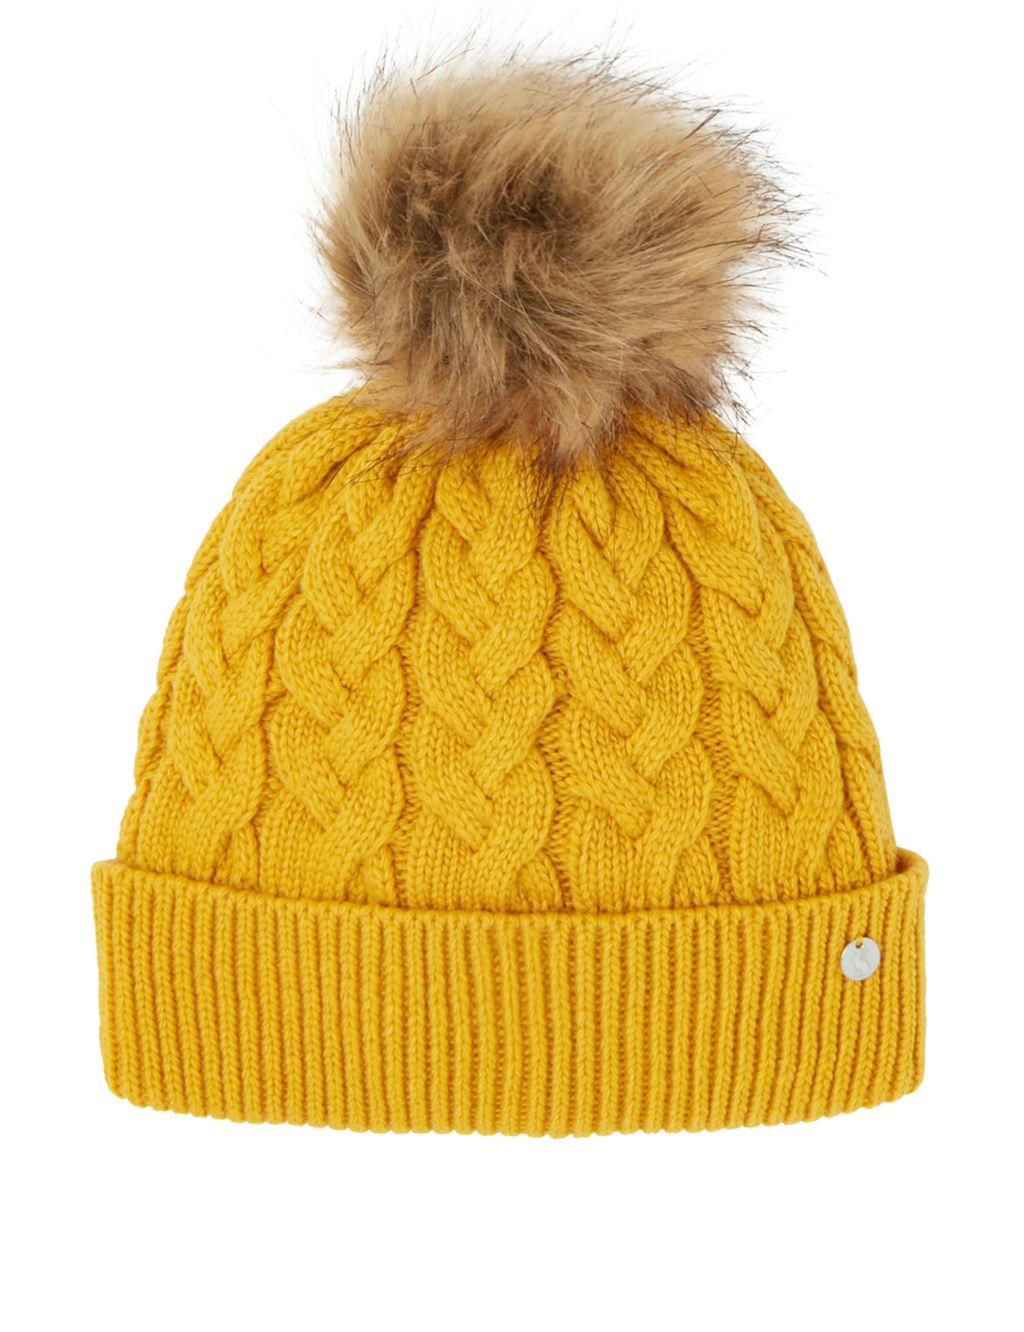 Knitted Pom Beanie Hat image 1